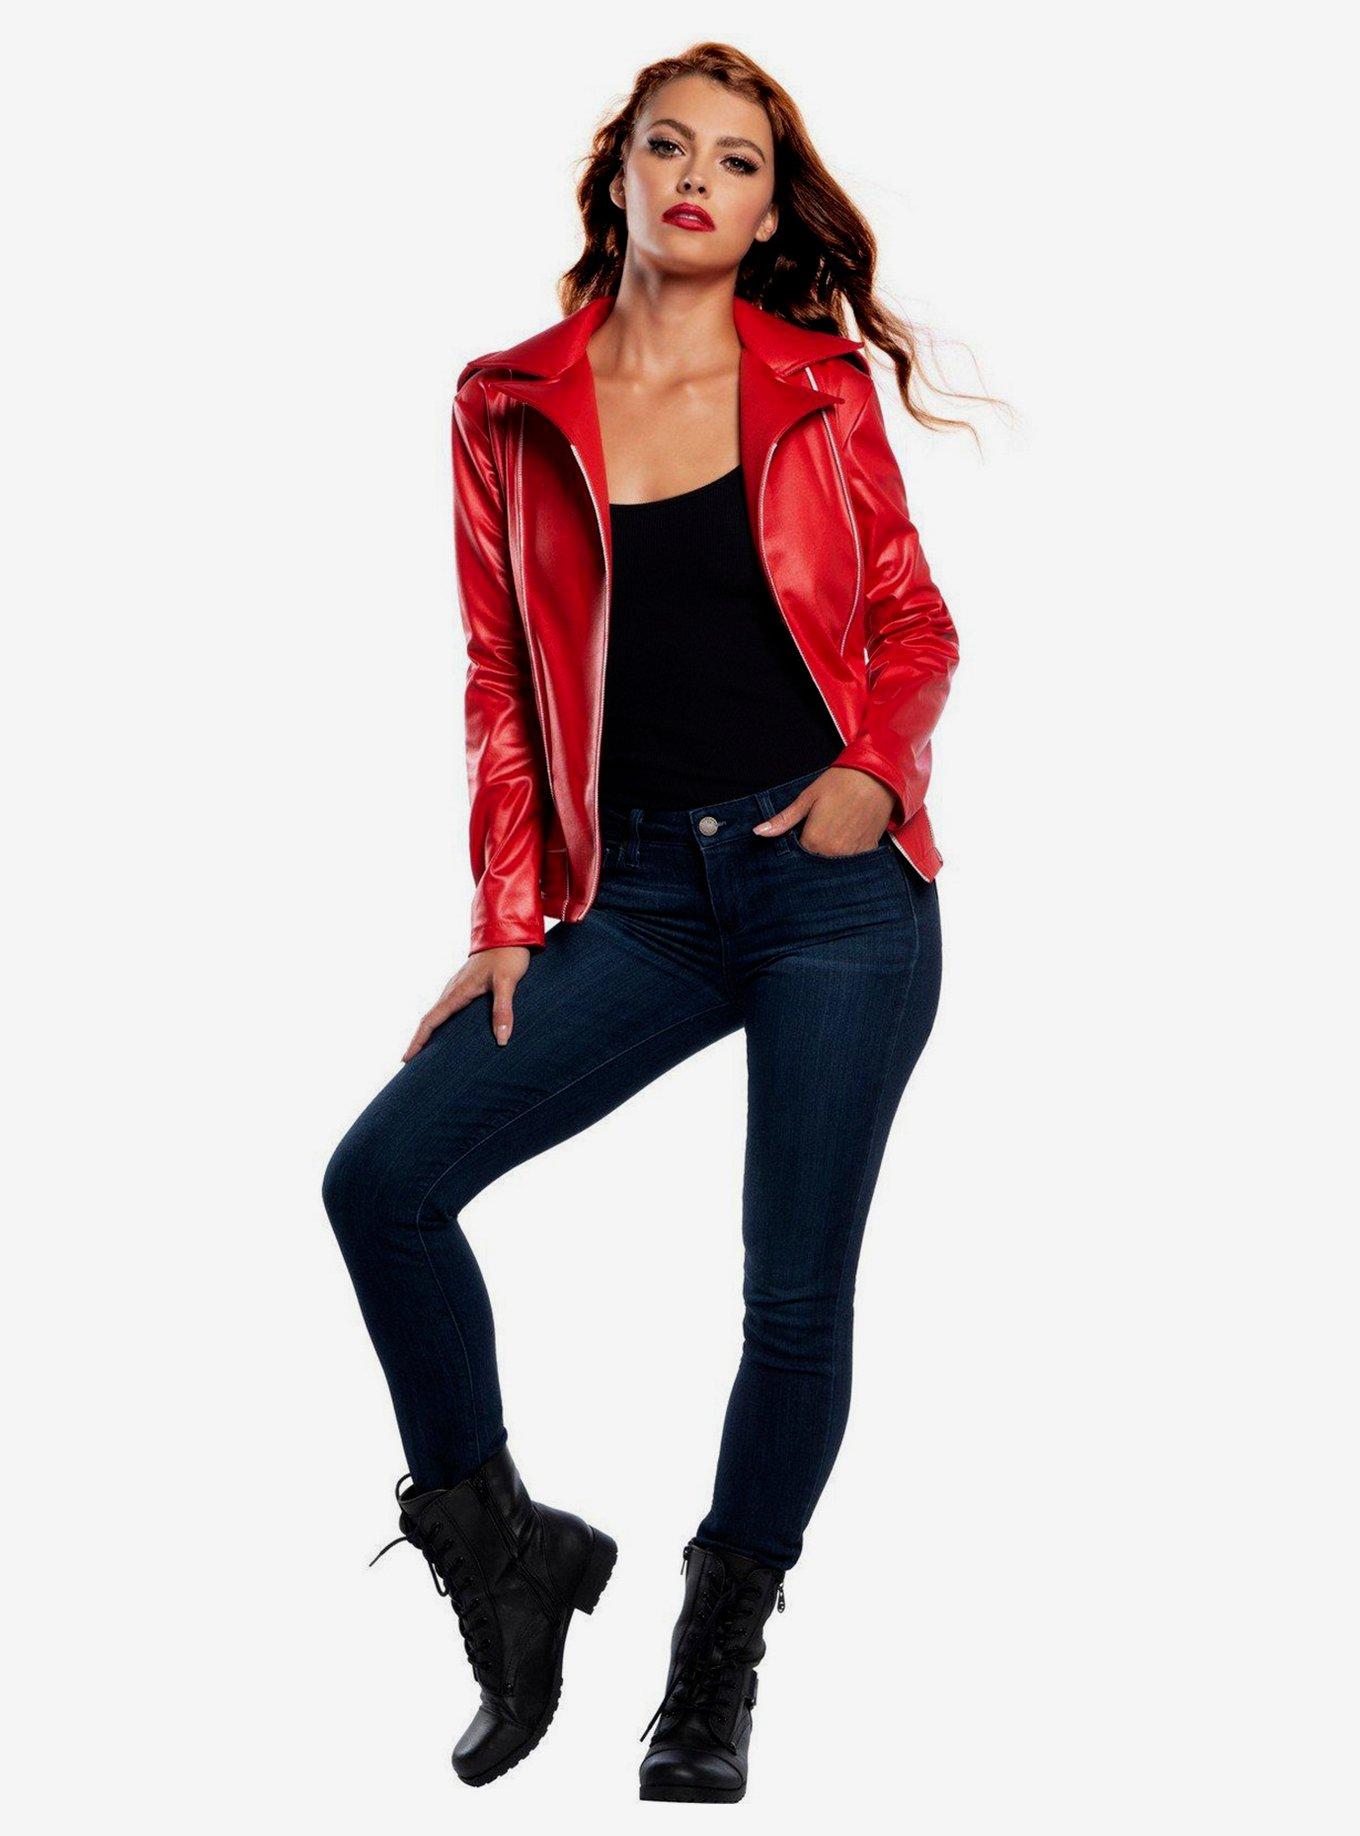 Riverdale Cherry Blossom Serpent Jacket Costume, RED, hi-res